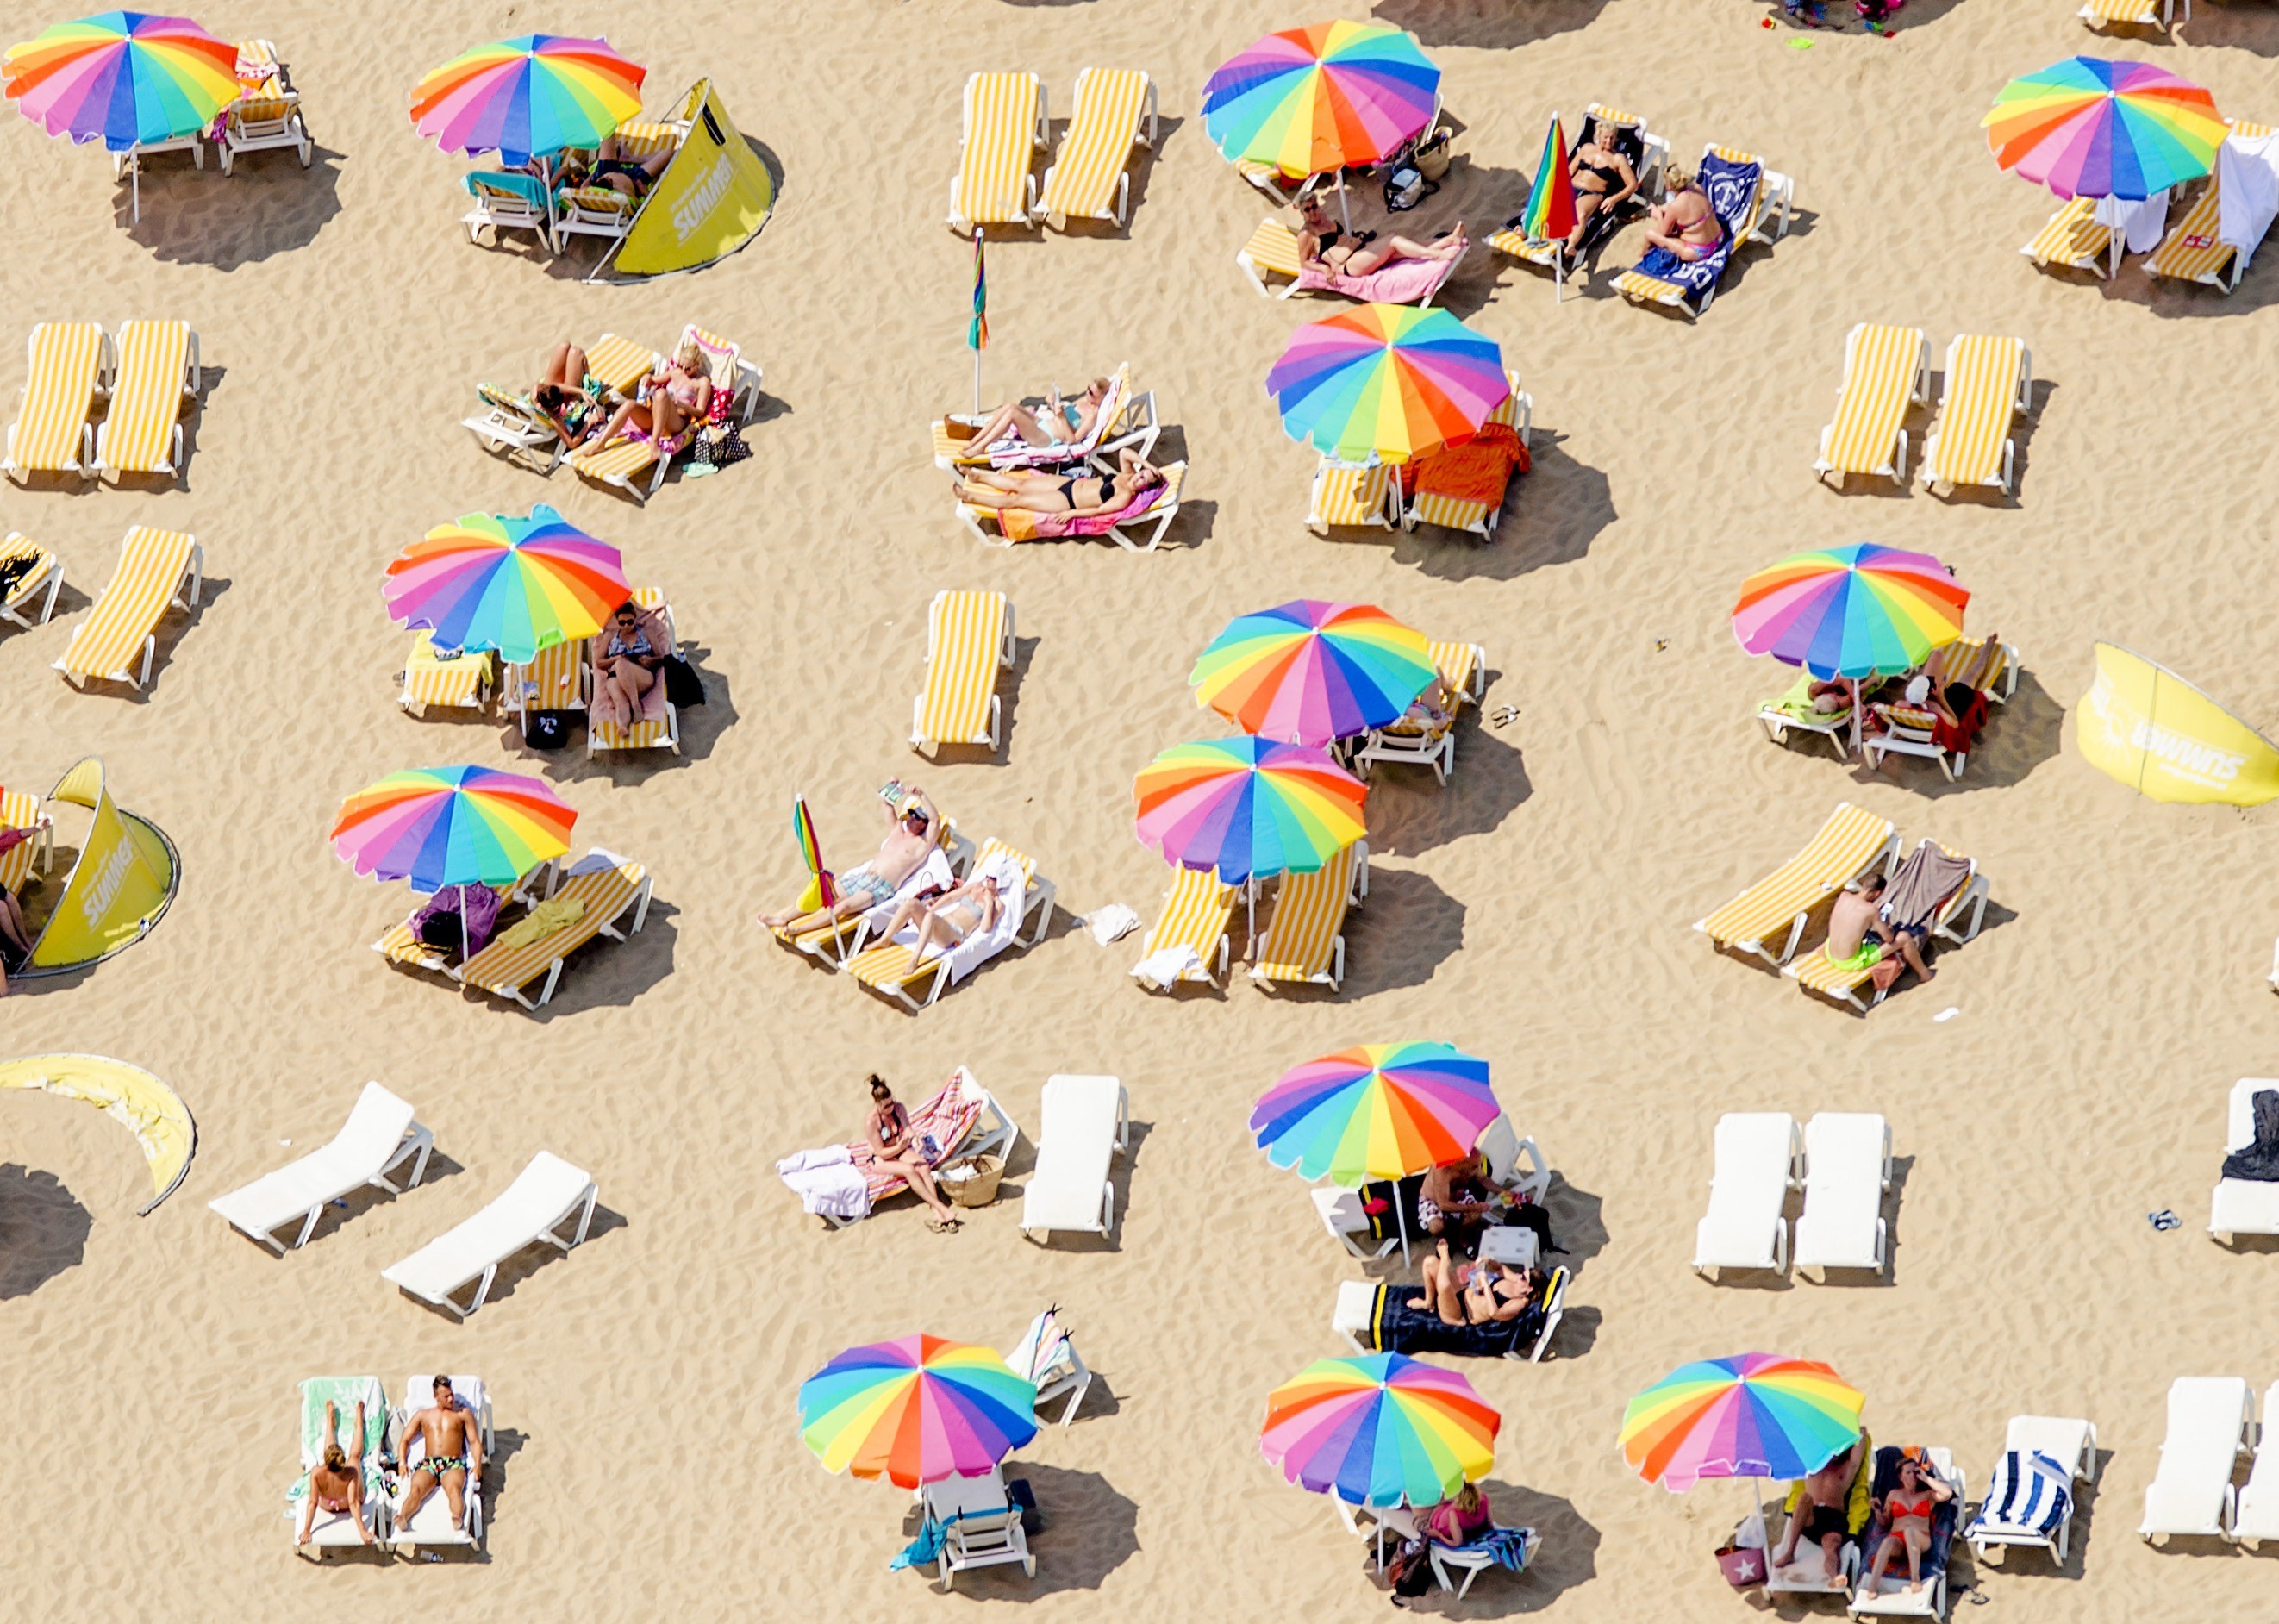 An aerial view shows sunbathers sitting under colorful umbrellas on the beach in Scheveningen, the Netherlands, on July 1, 2015, on a warm summer day. (Robin Van Lonkhuijsen&mdash;AFP/Getty Images)